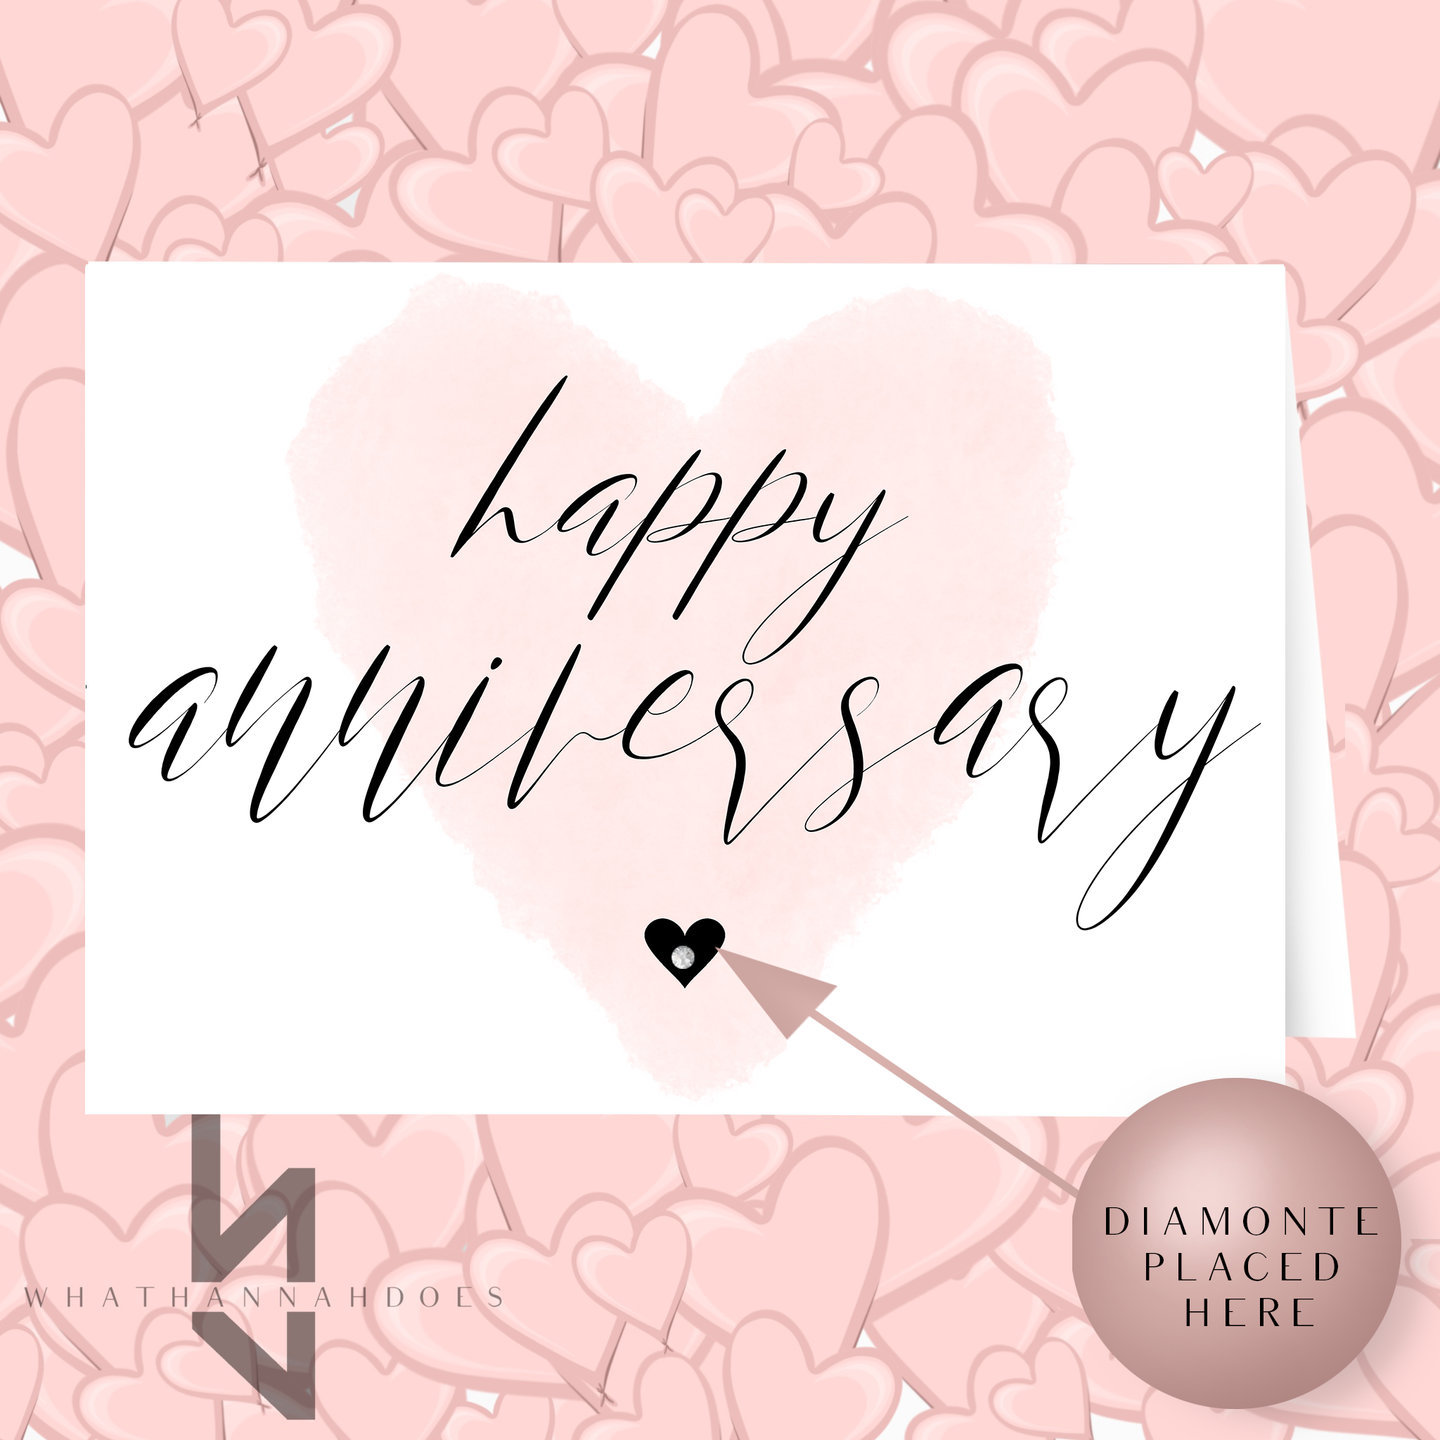 Happy Anniversary A5 Card With Diamonte Heart